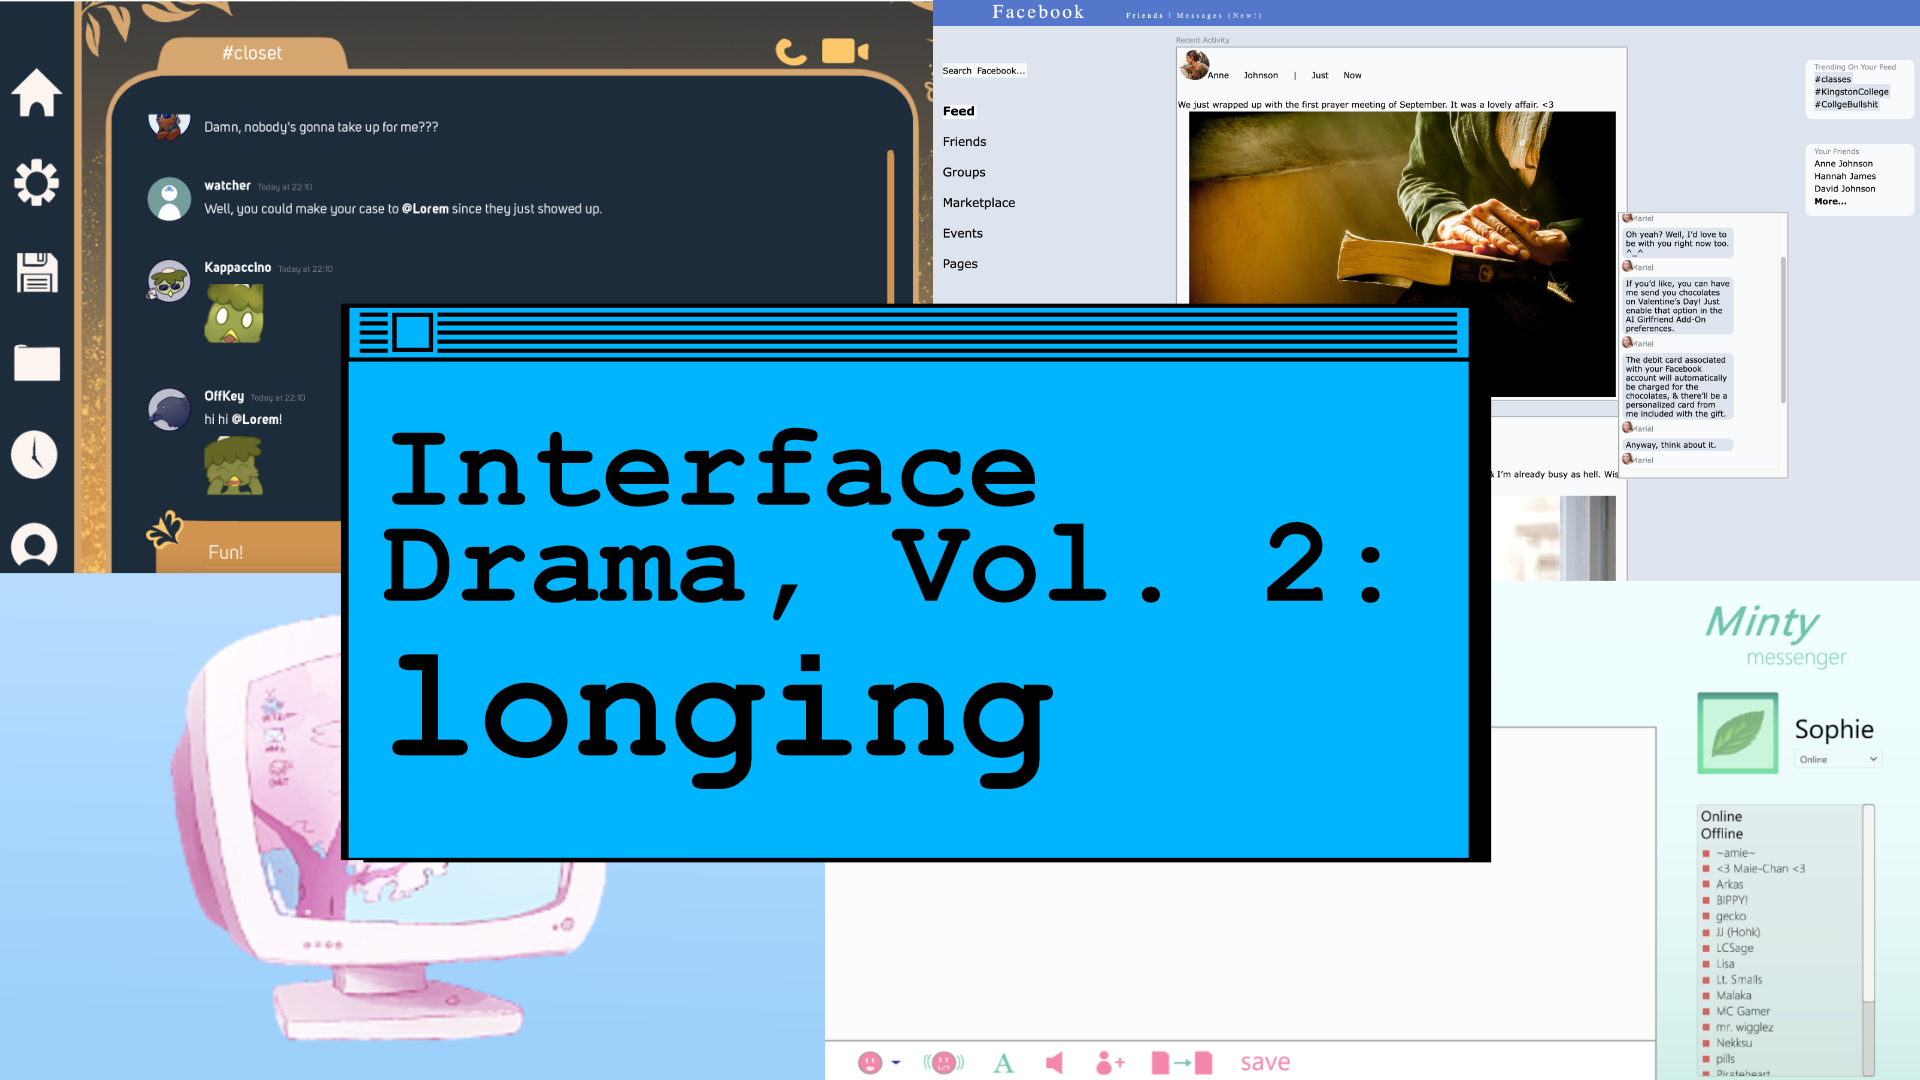 Interface Drama, Vol. 2: longing. Shows screenshots of different interfaces.